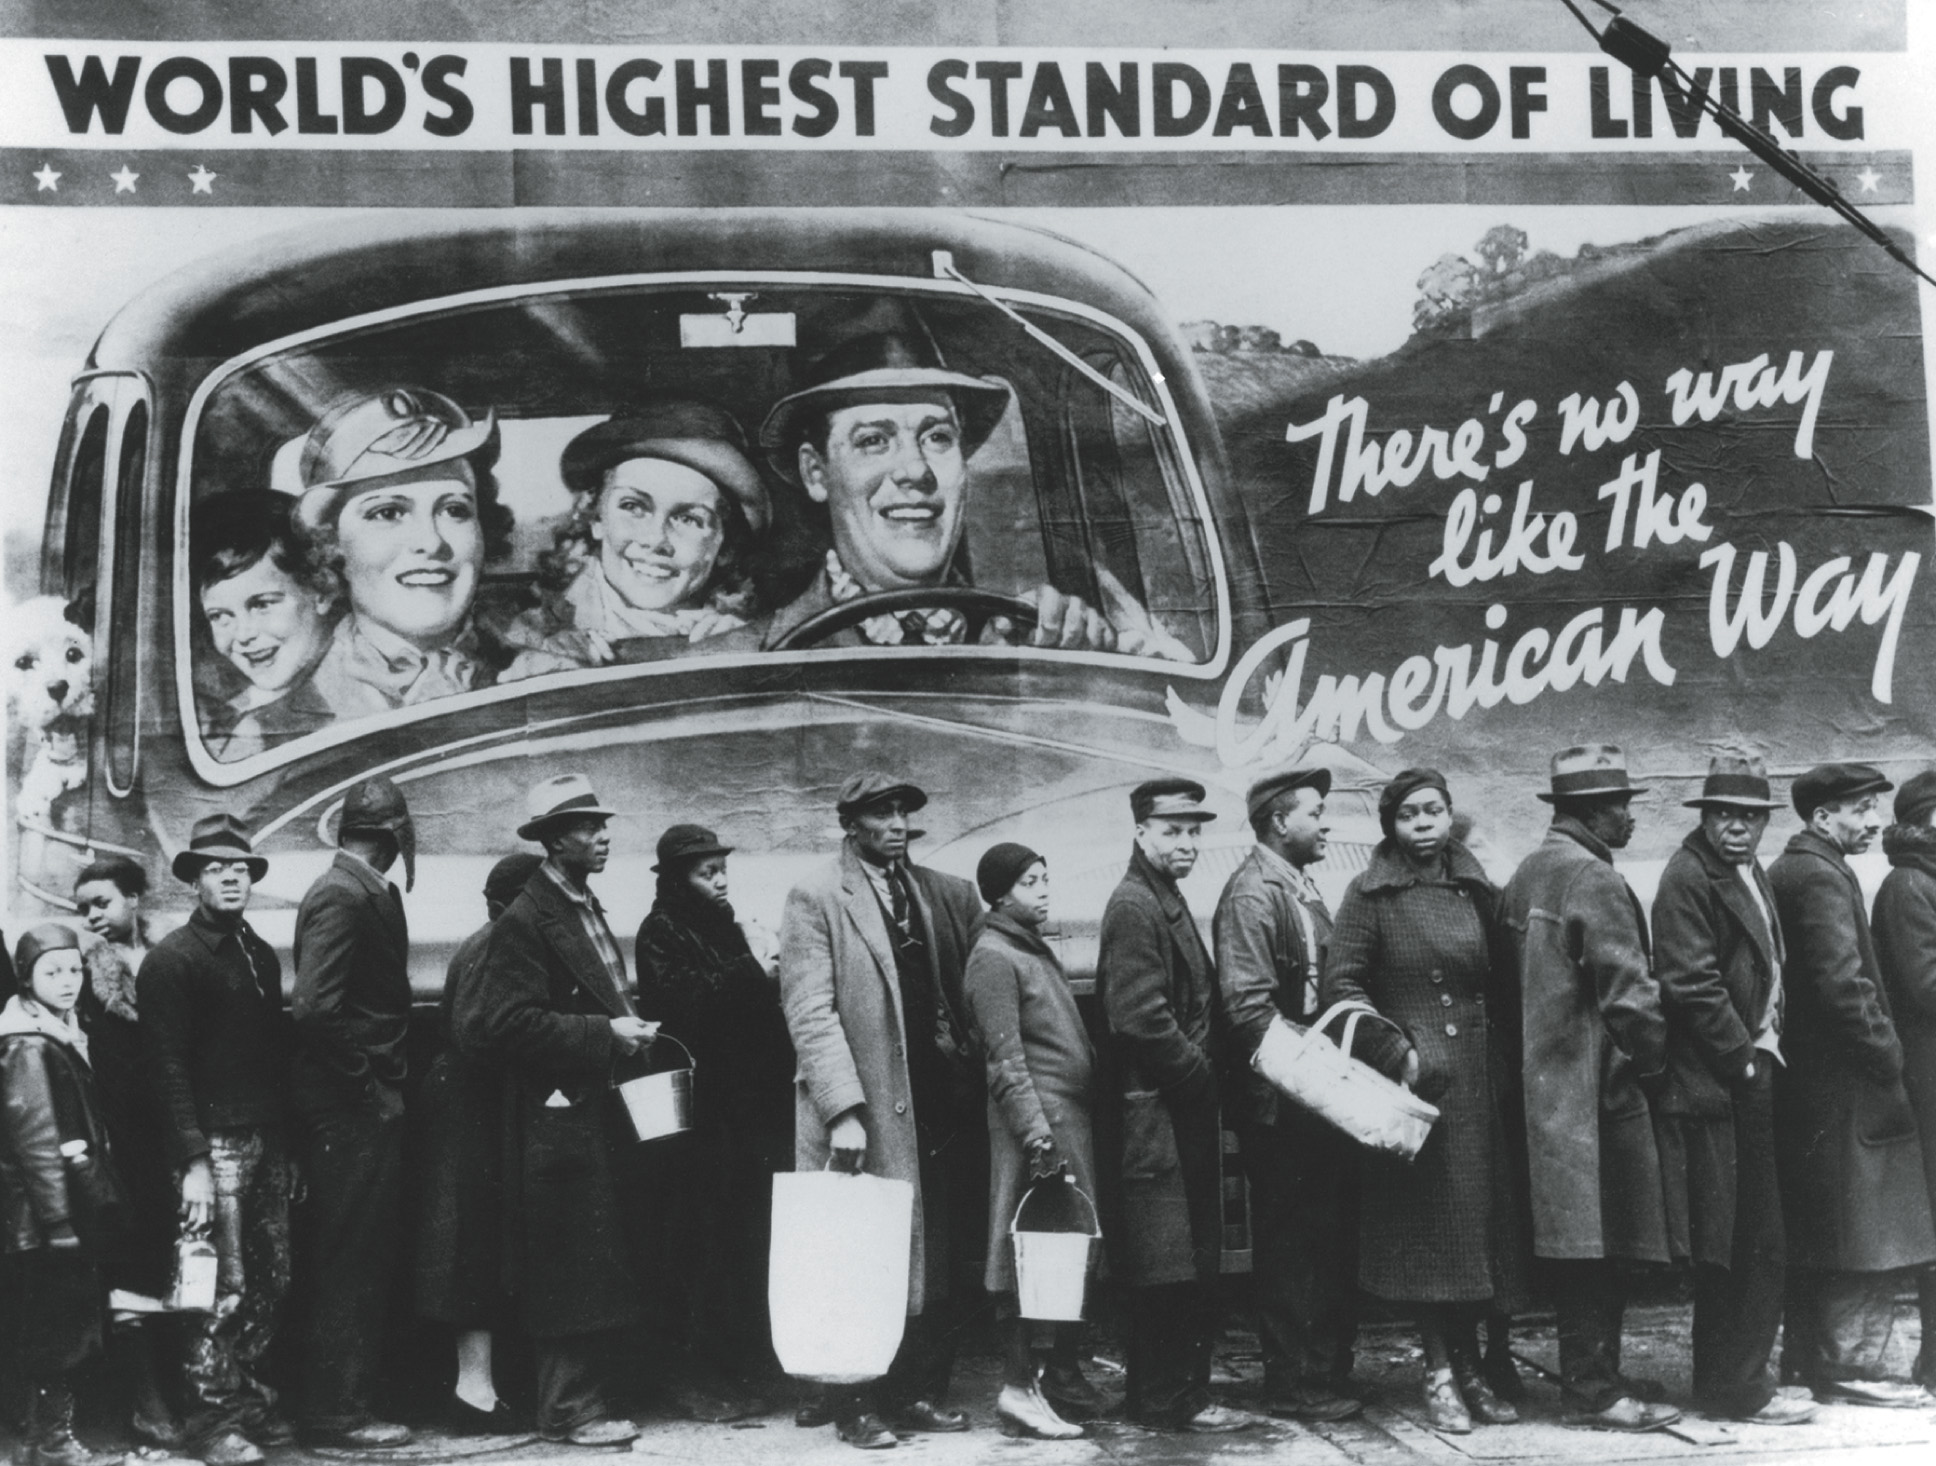 Photo: people wait in a bread line in front of a billboard showing a happy family inside a car with the slogan there's no way like the American Way.